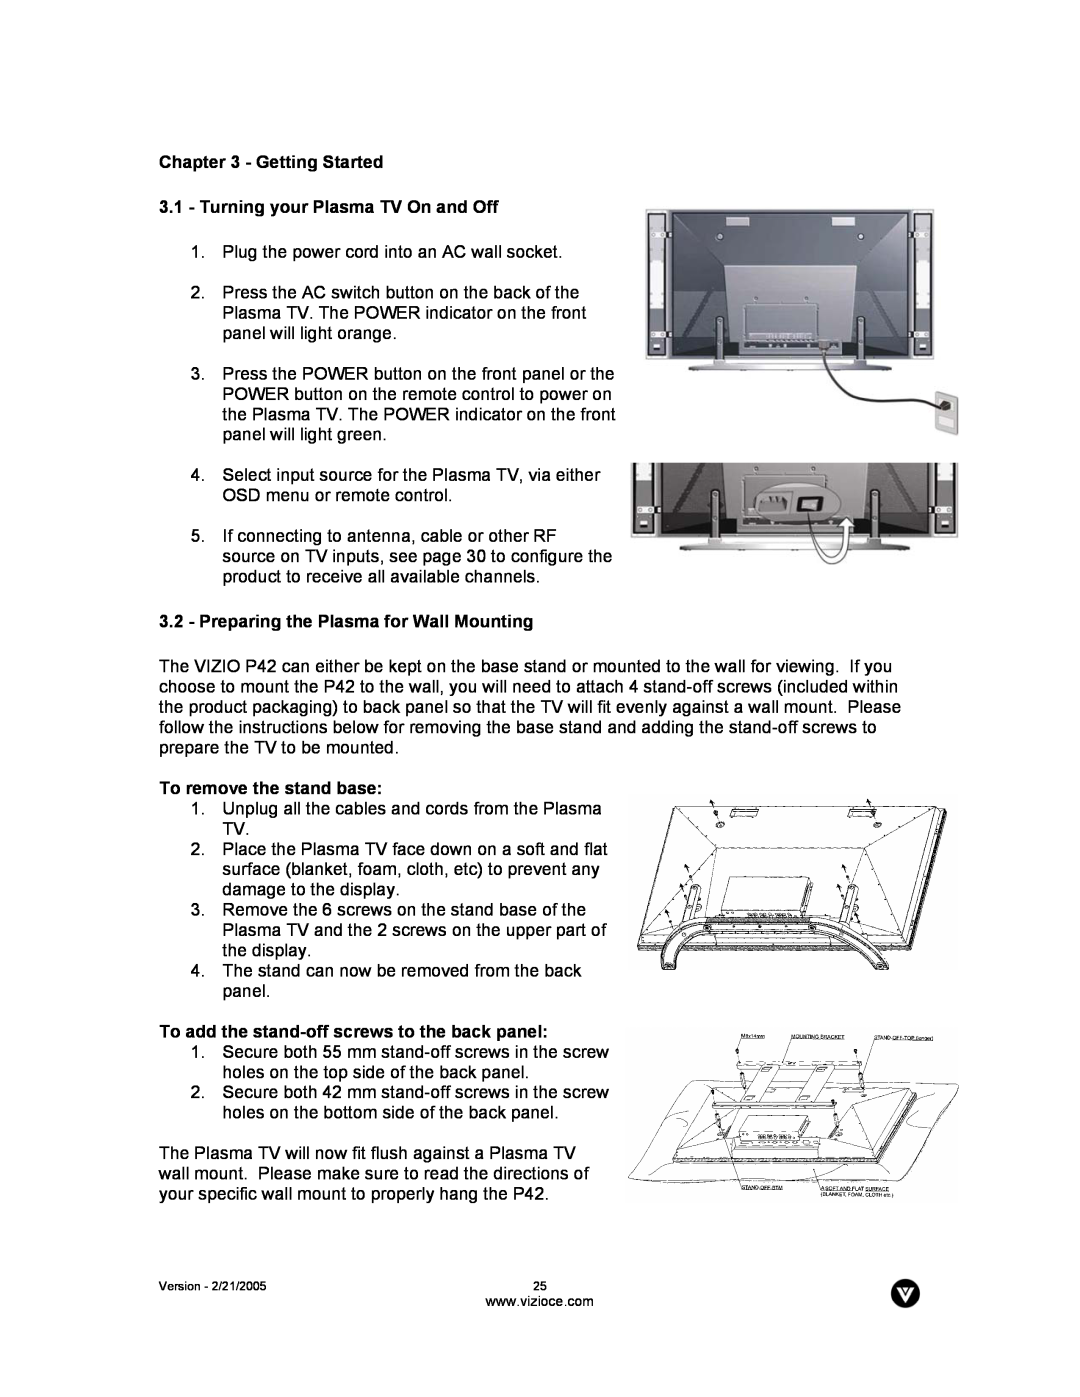 Vizio P42 manual Getting Started 3.1 - Turning your Plasma TV On and Off, Preparing the Plasma for Wall Mounting 